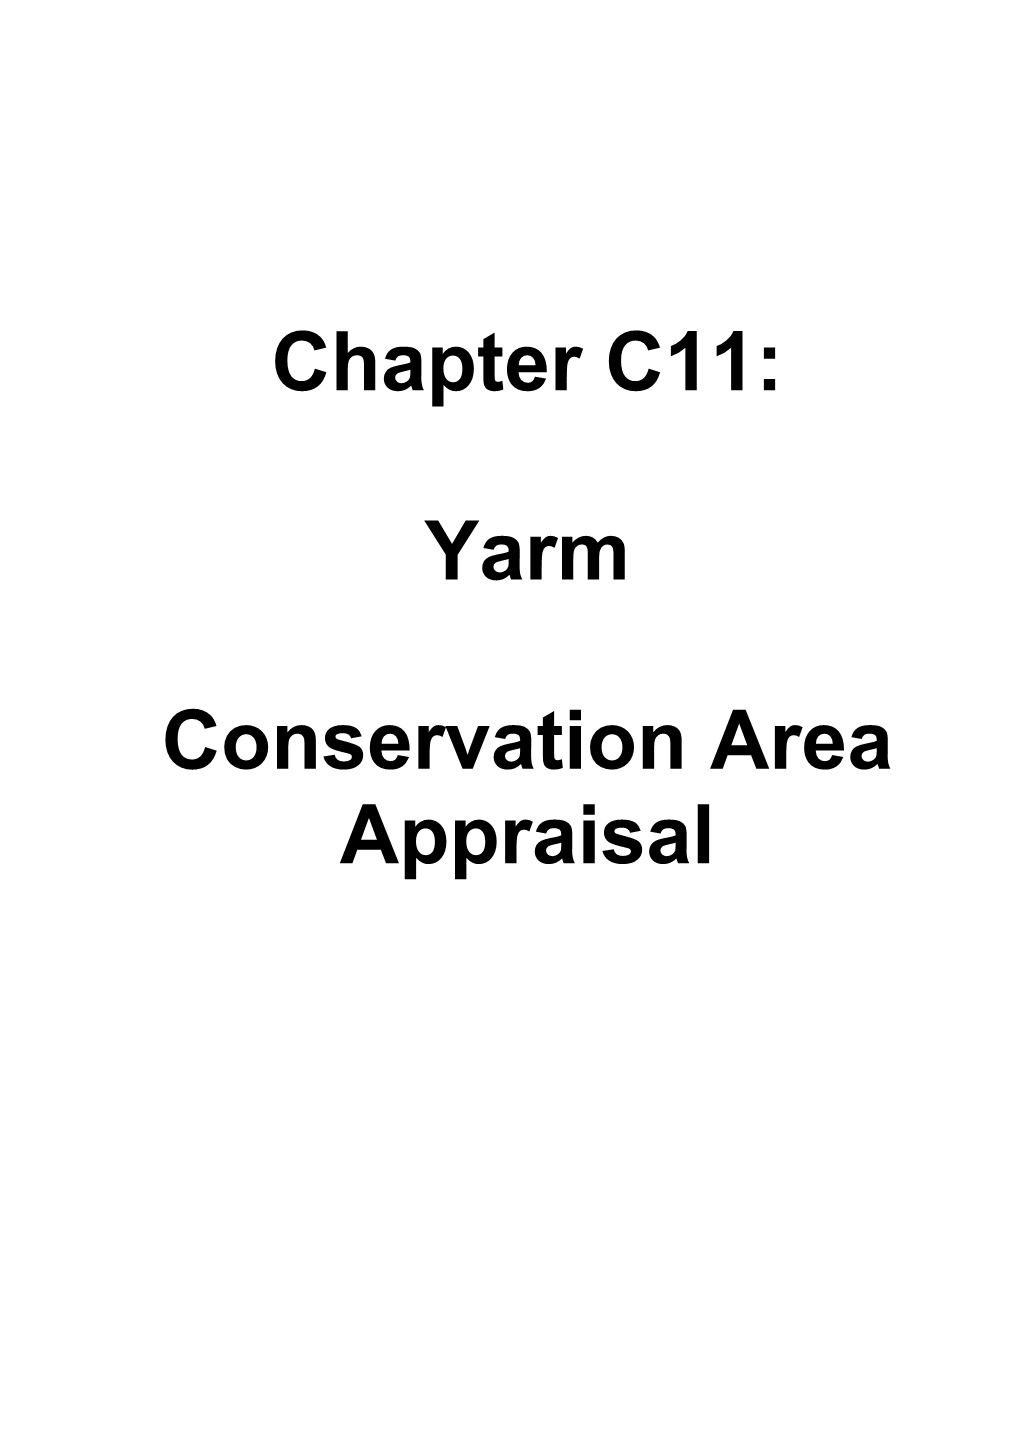 Chapter C11: Yarm Conservation Area Appraisal